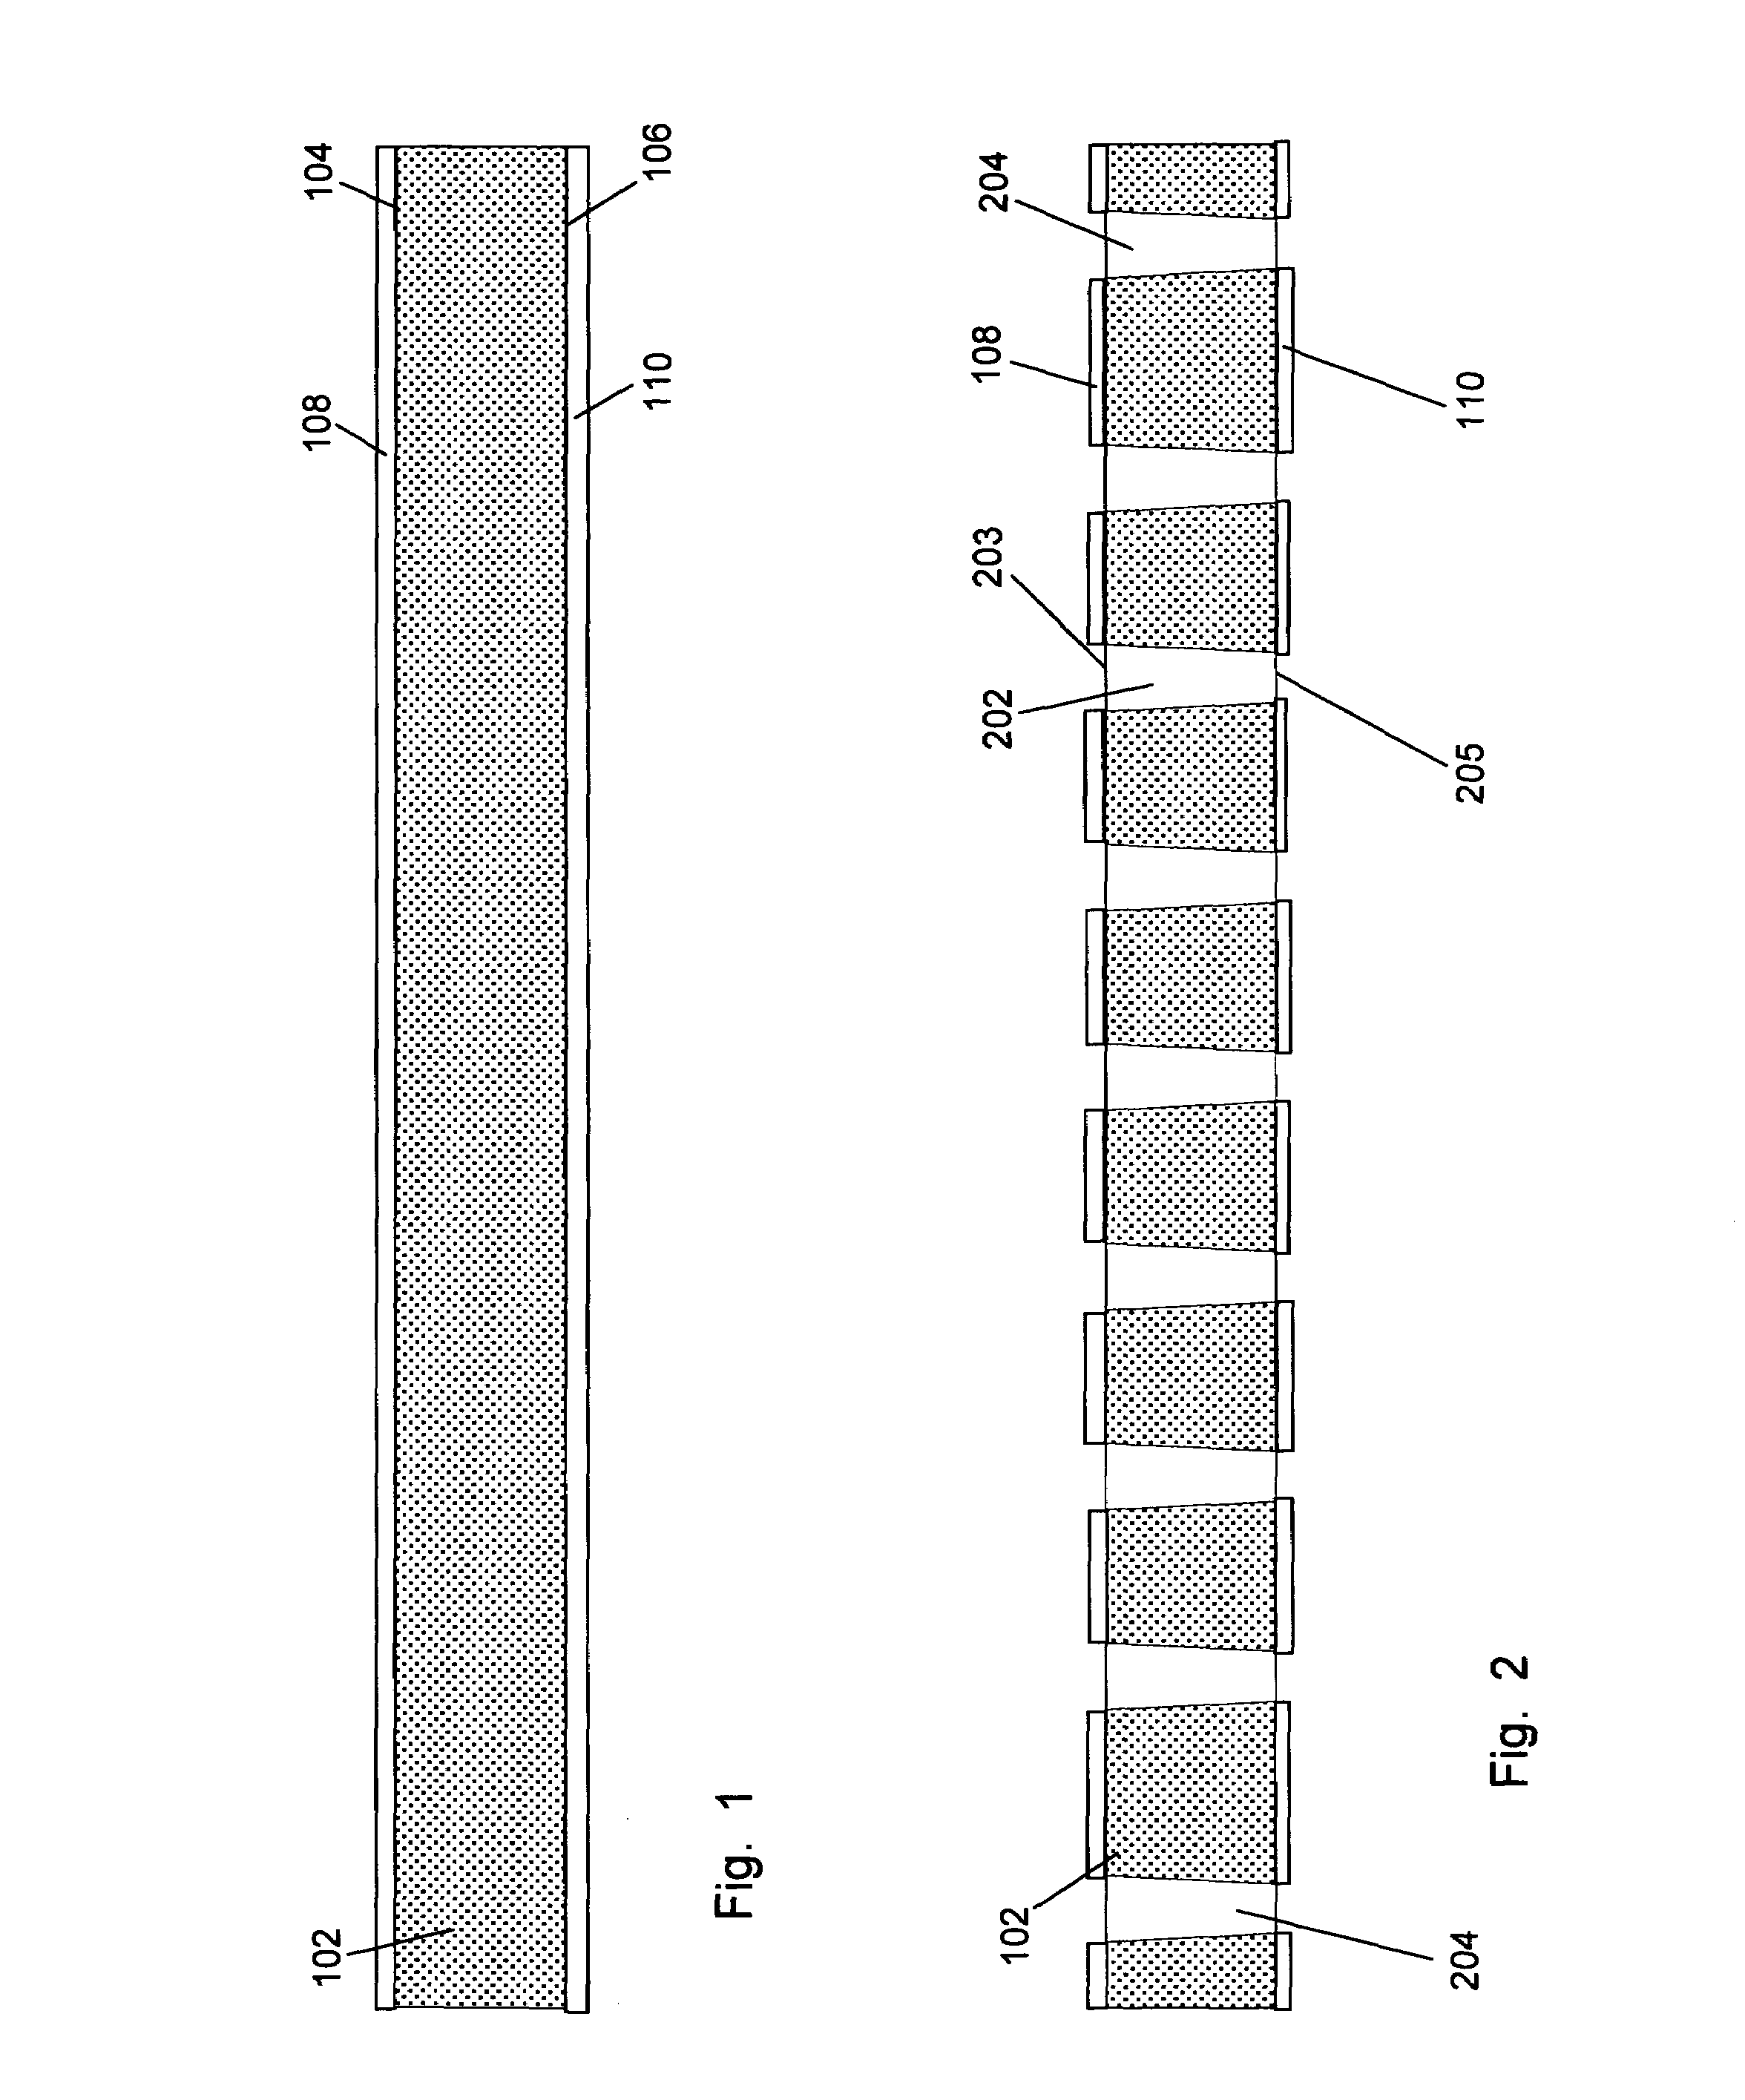 Wafer translator having a silicon core isolated from signal paths by a ground plane